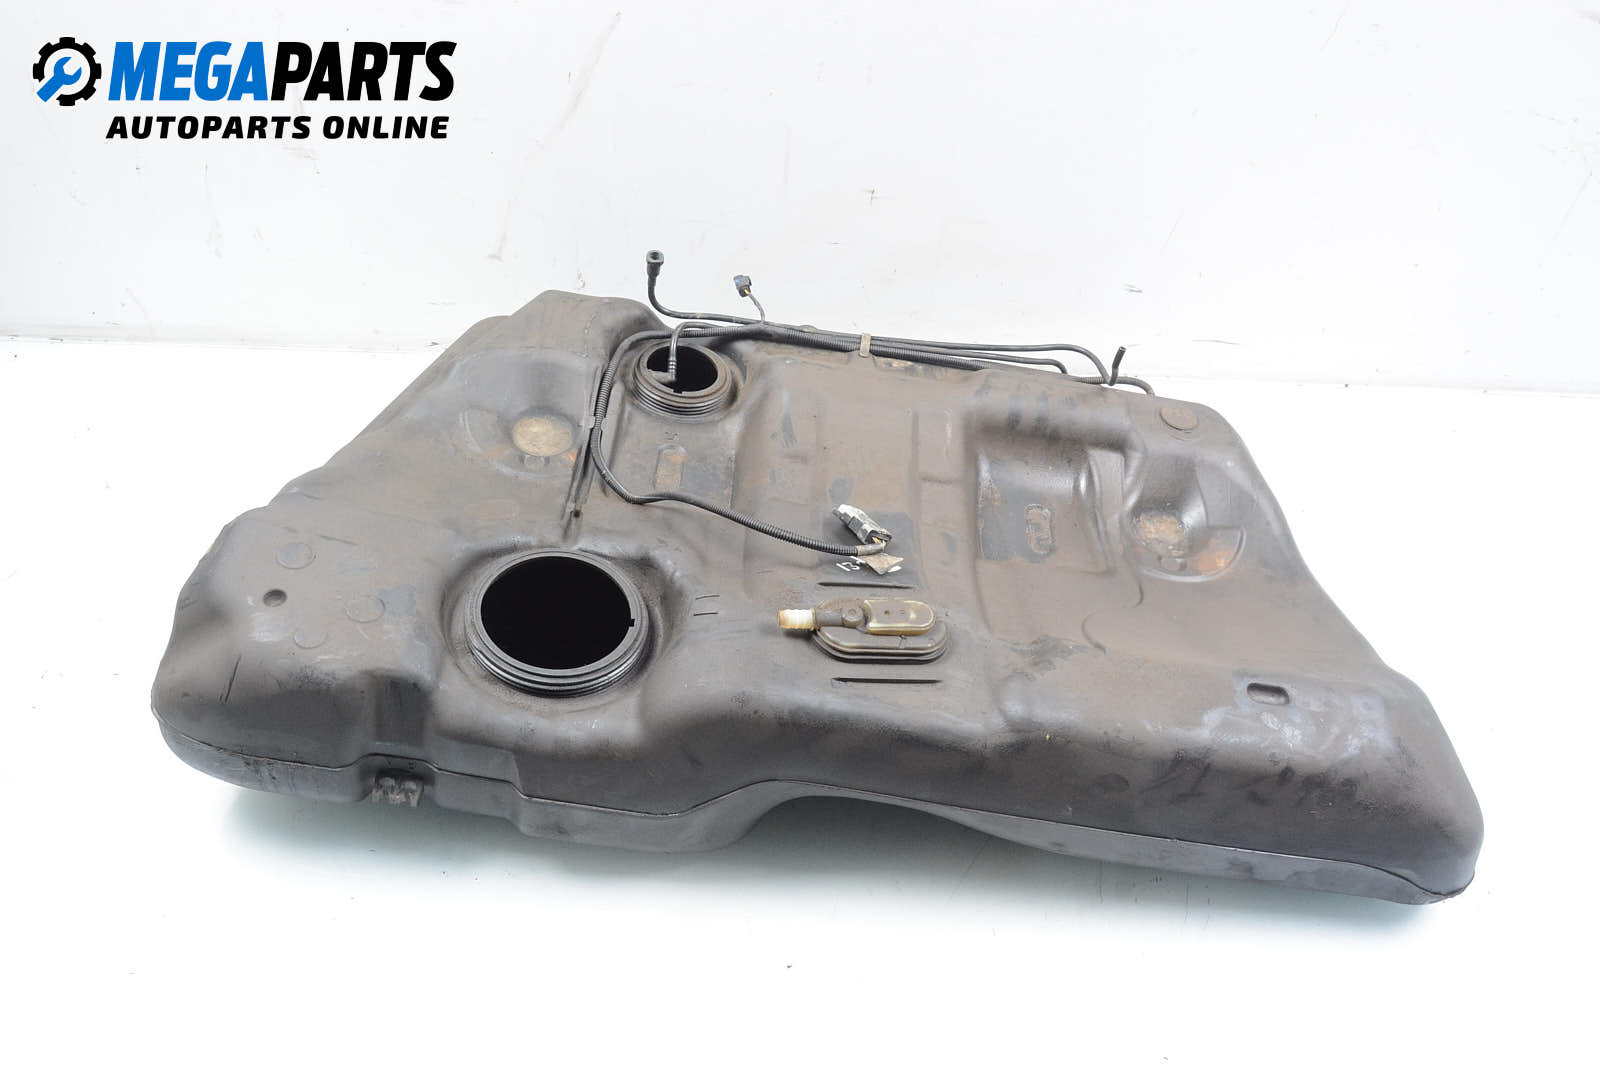 Fuel tank for Peugeot 406 2.2 HDI, 133 hp, coupe, 2002 Price: € 26.52